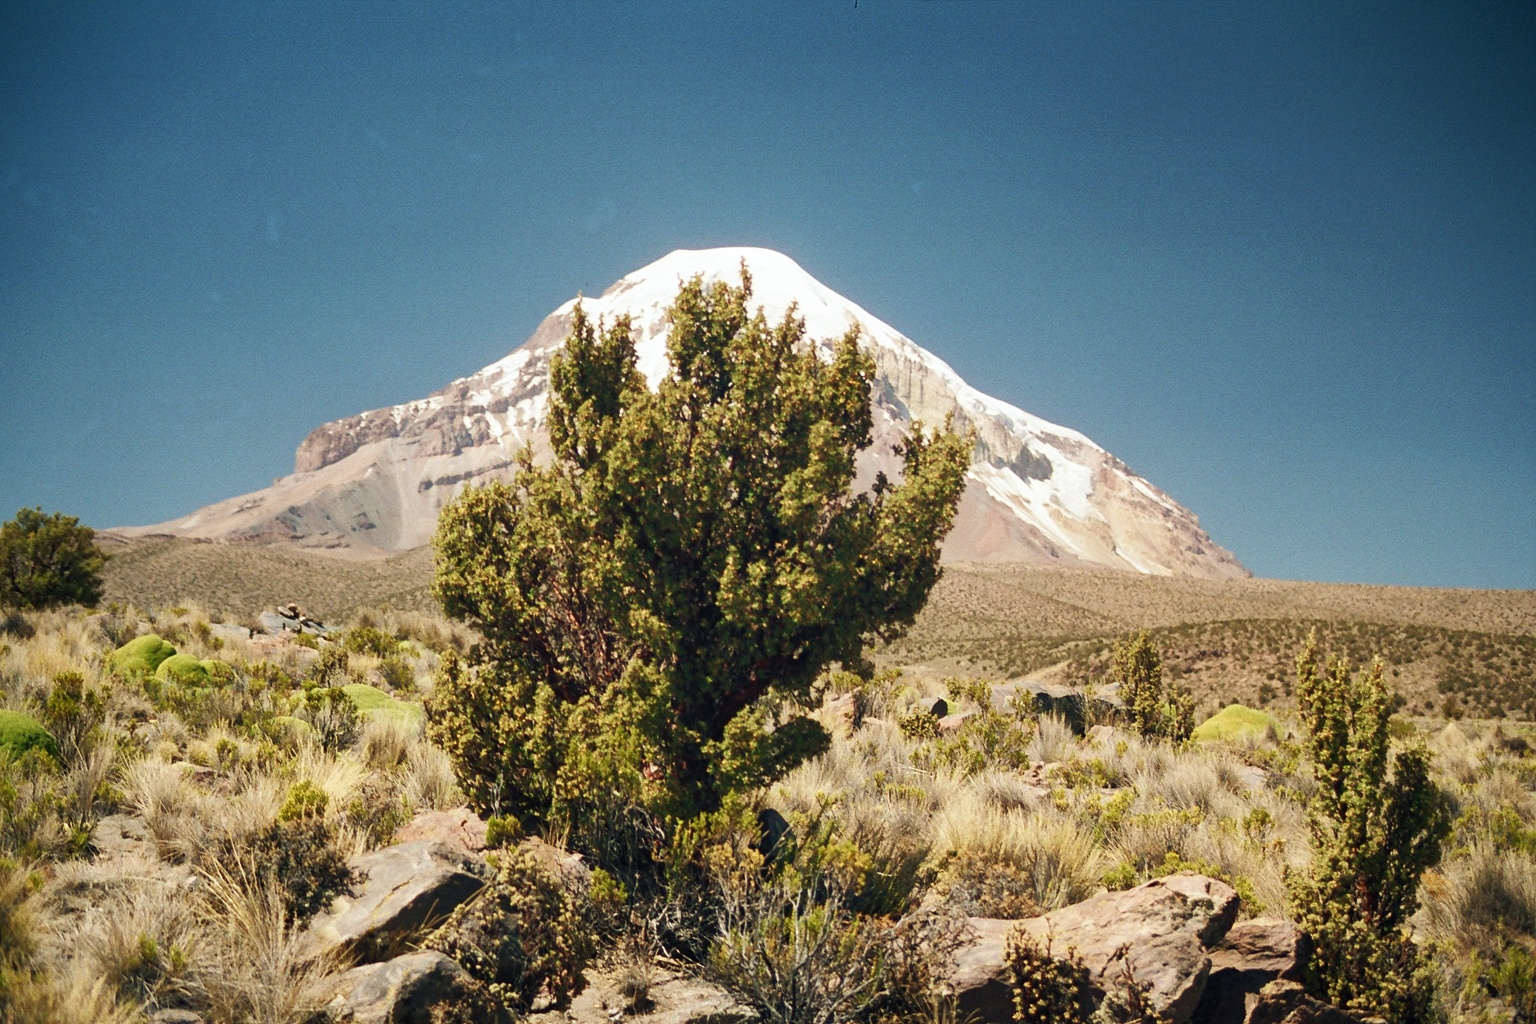 Polylepis tree with Sajama volcano in the background